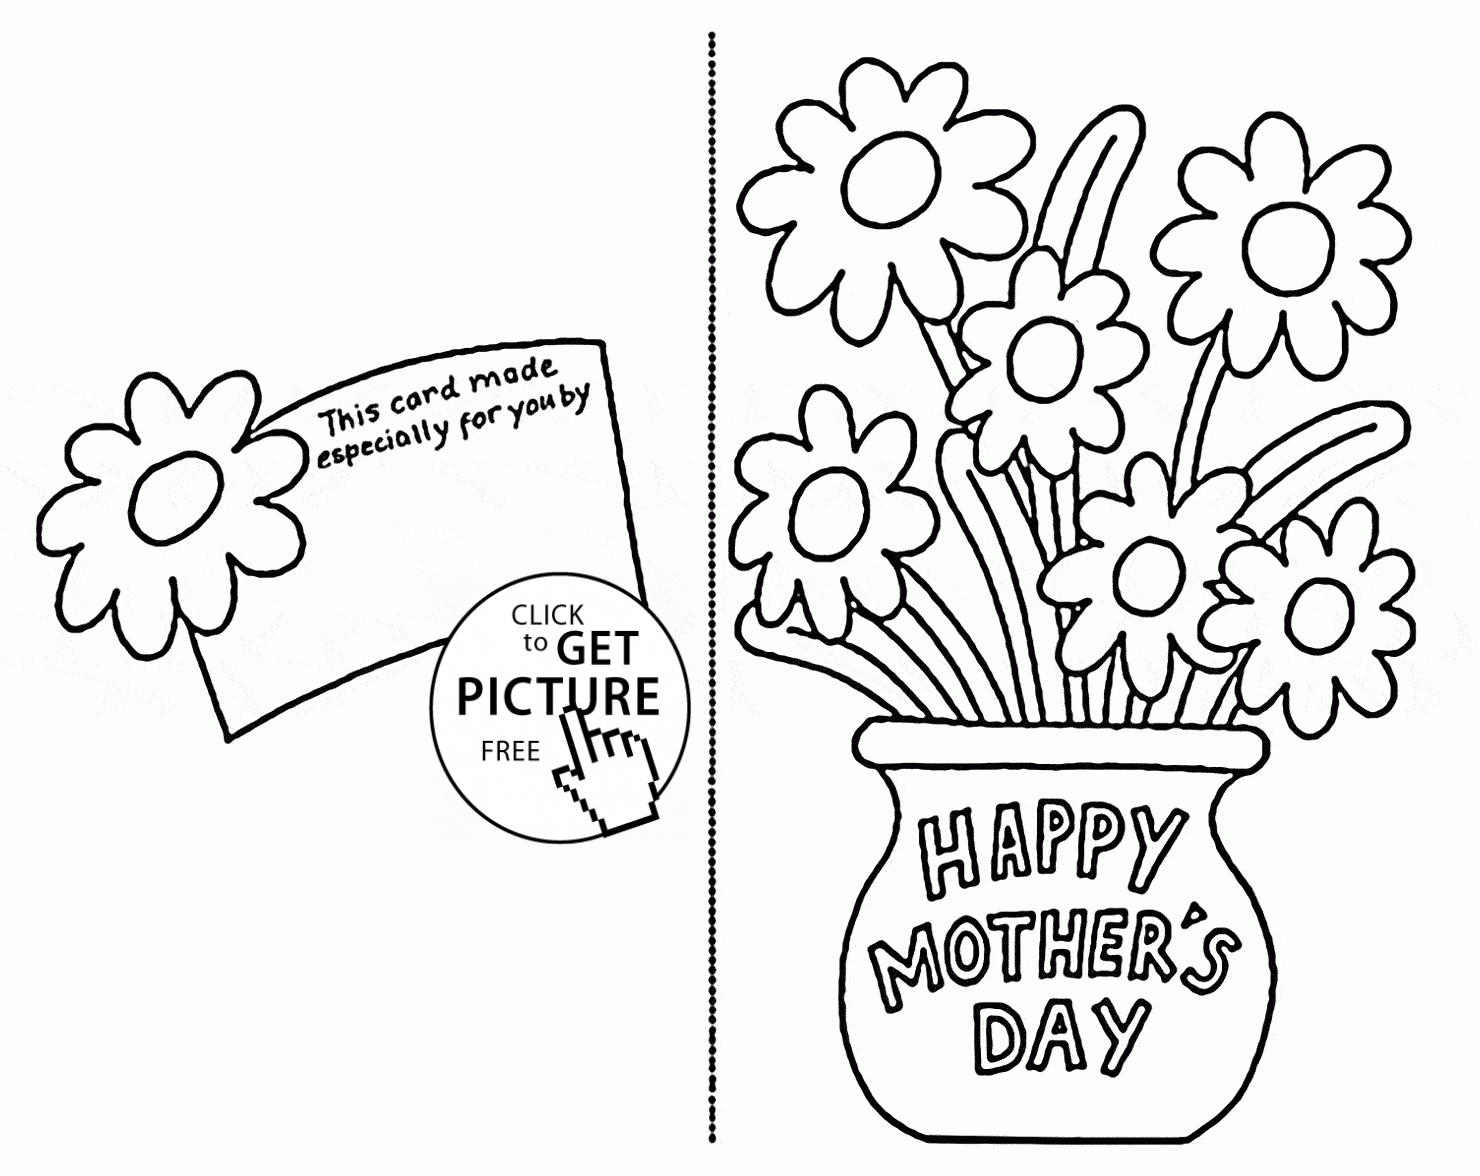 43 Free Printable Mother S Day Card Templates To Color in Photoshop with Mother S Day Card Templates To Color